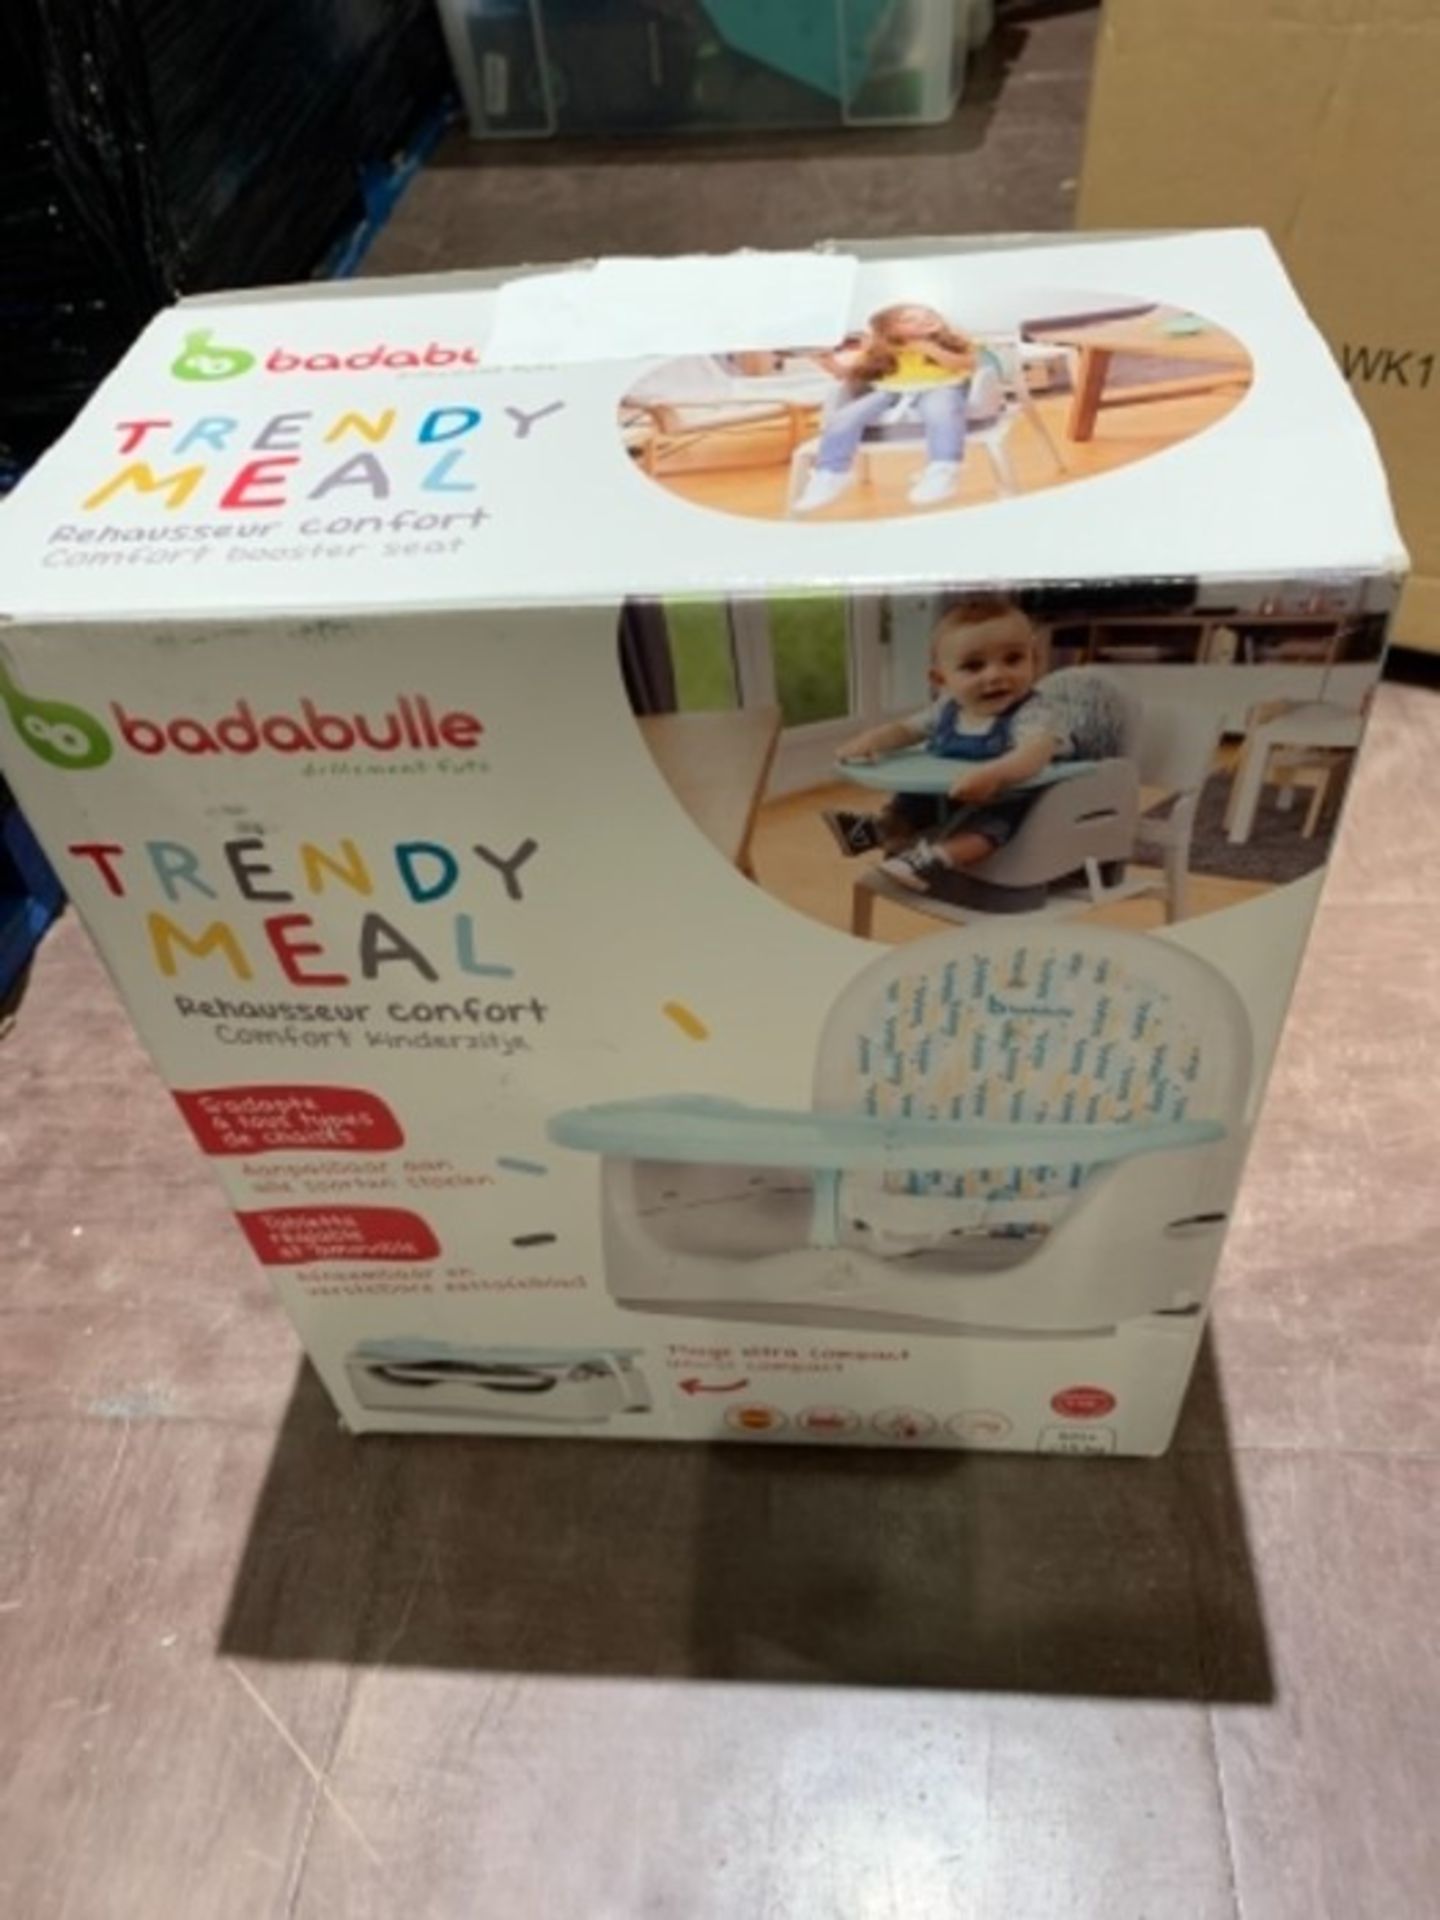 Badabulle Folding Height-Adjustable Baby Trendy Feeding Booster Seat and Chair - Image 2 of 3